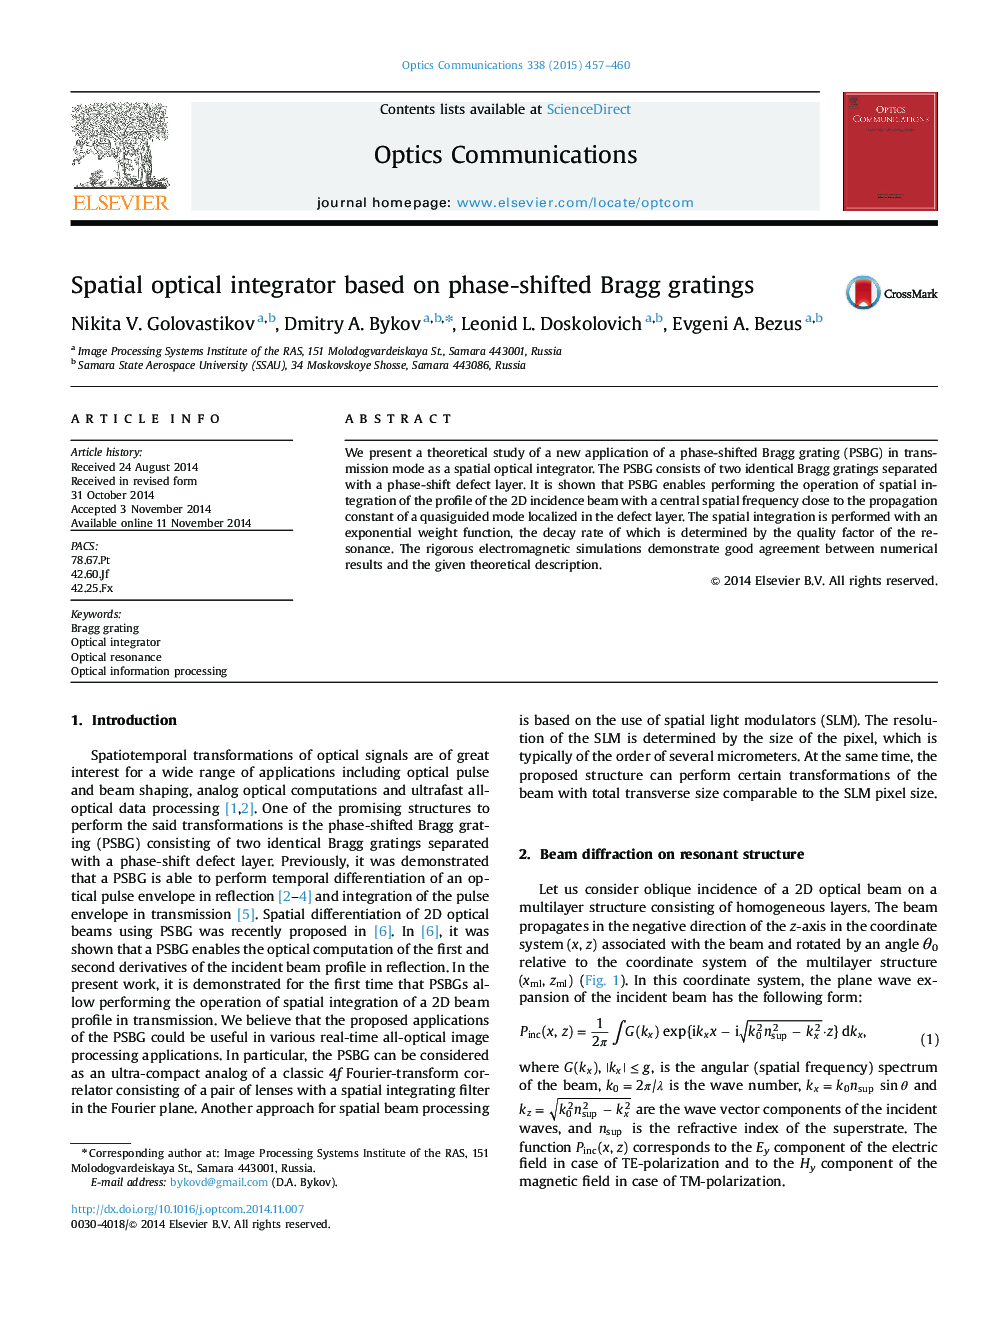 Spatial optical integrator based on phase-shifted Bragg gratings